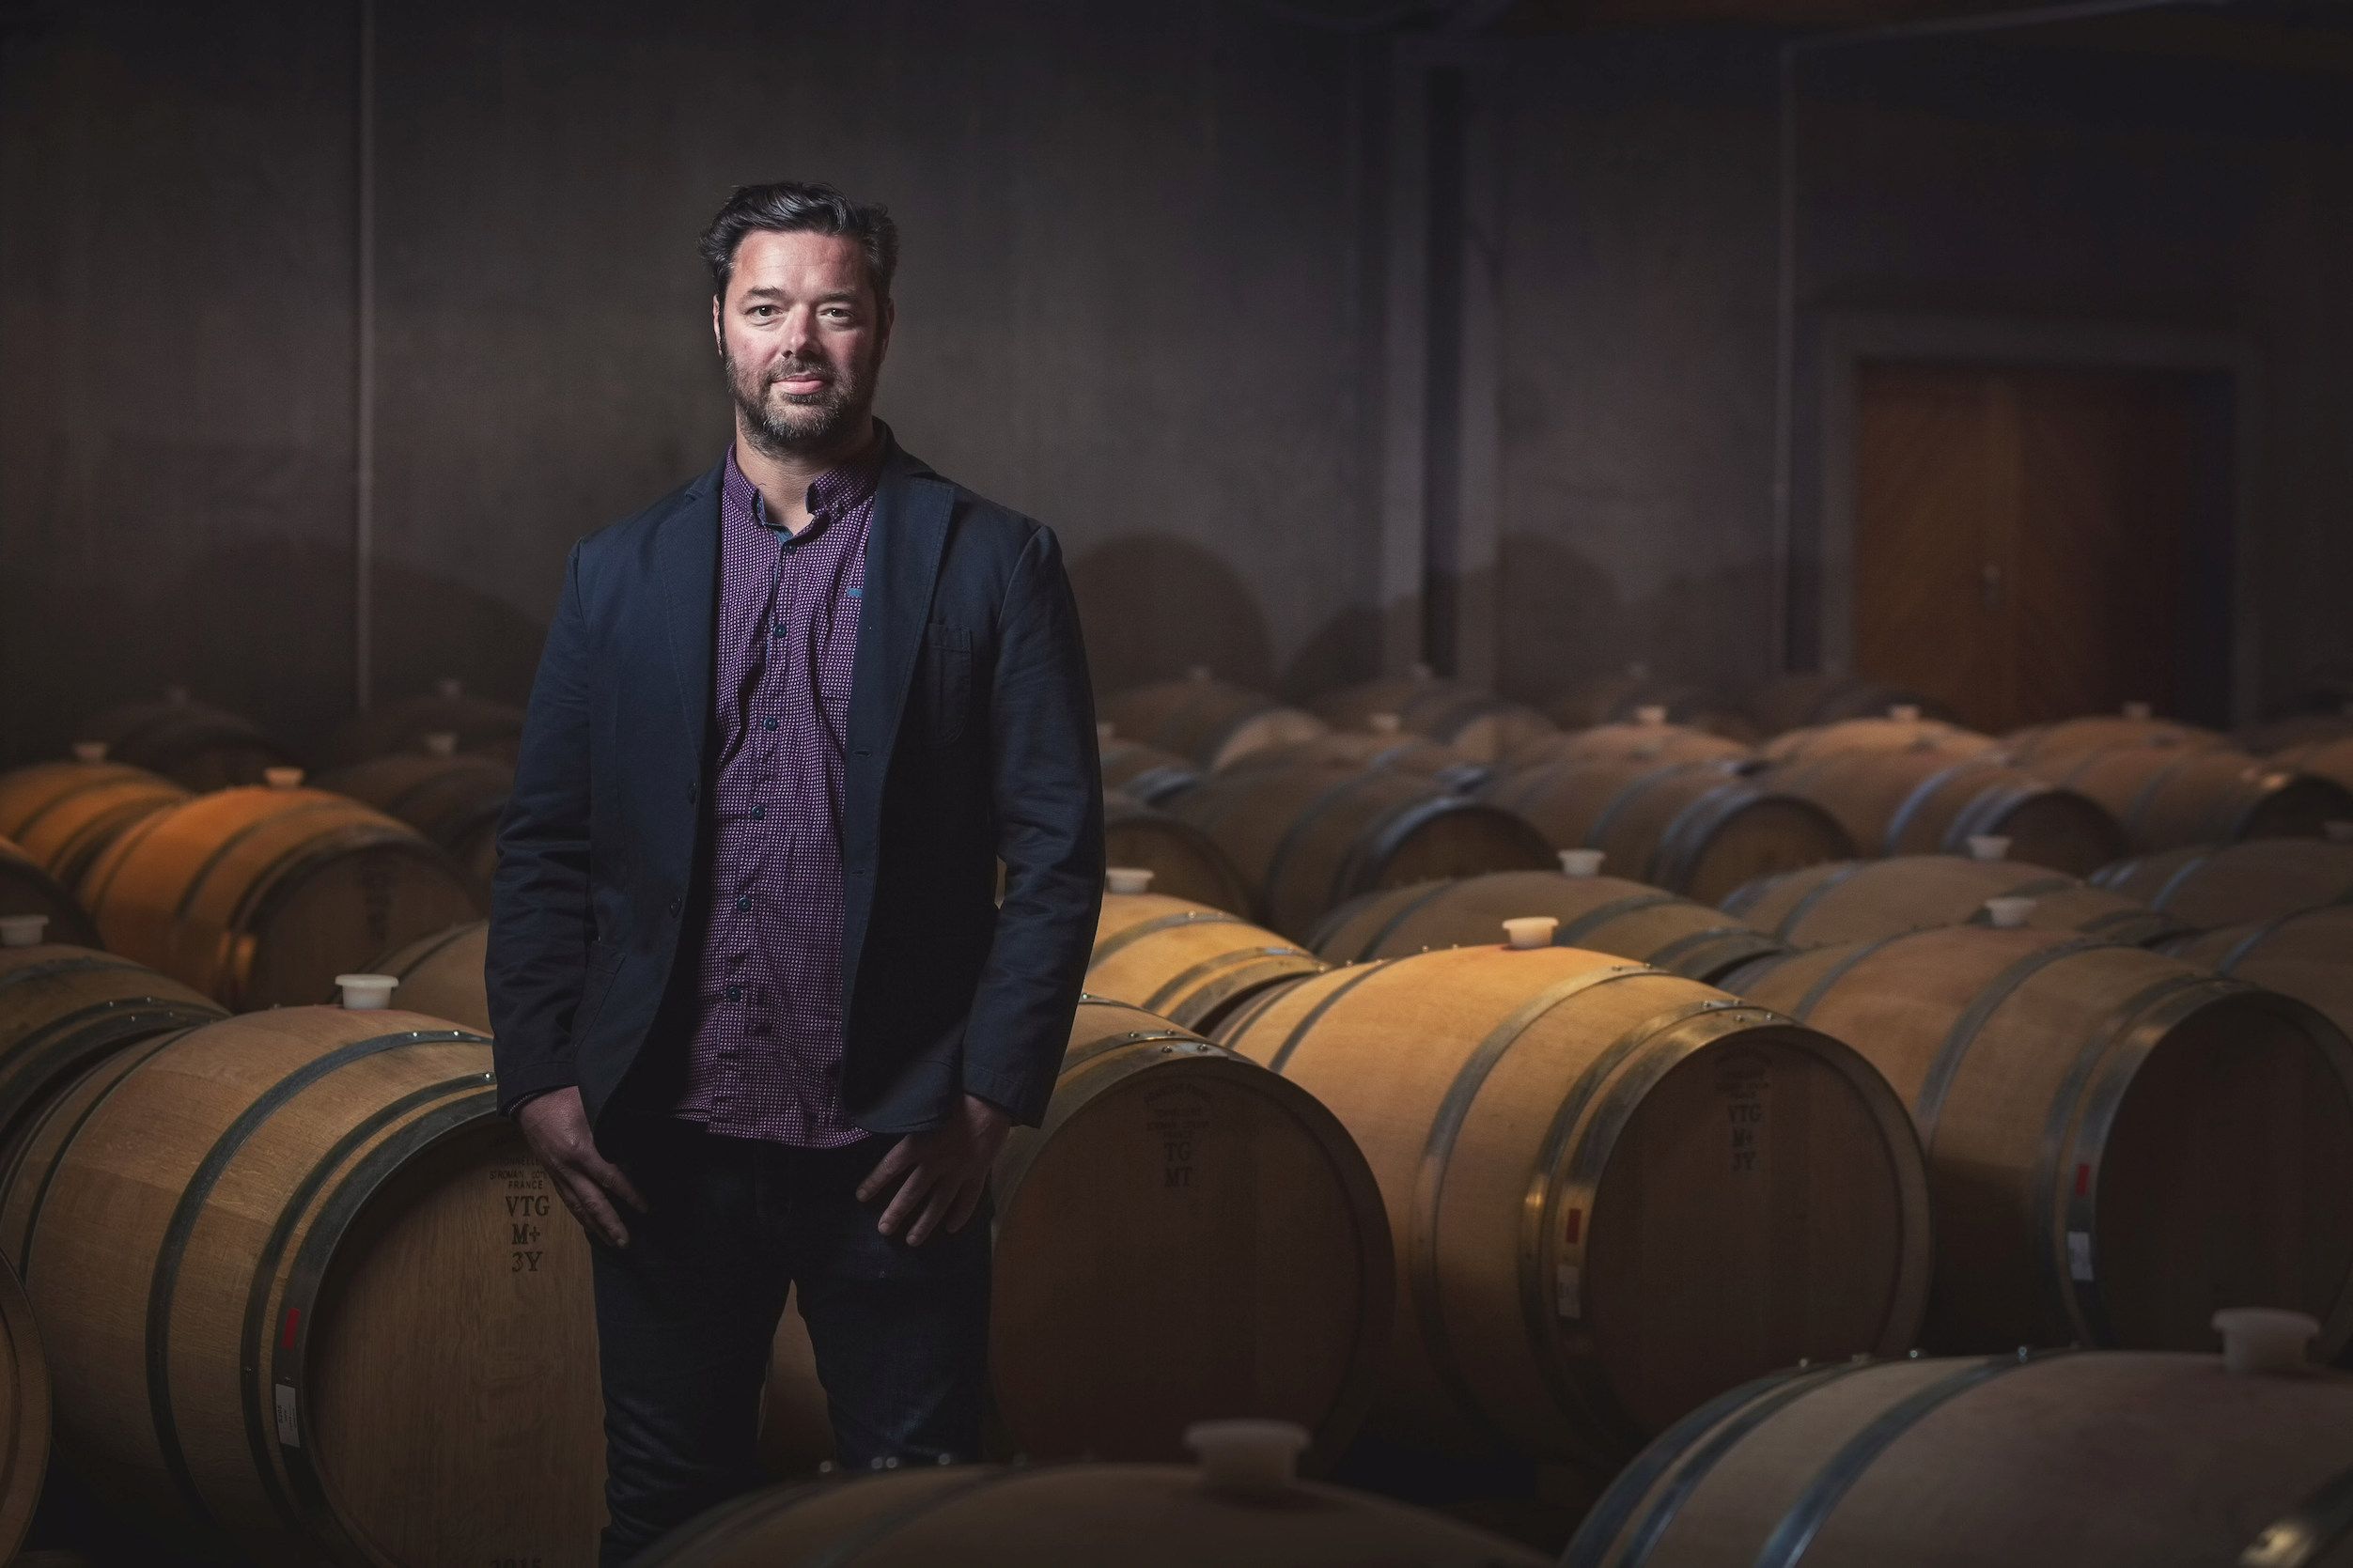 Daniel Sorrell on the story behind Cloudy Bay 2018 Sauvignon Blanc